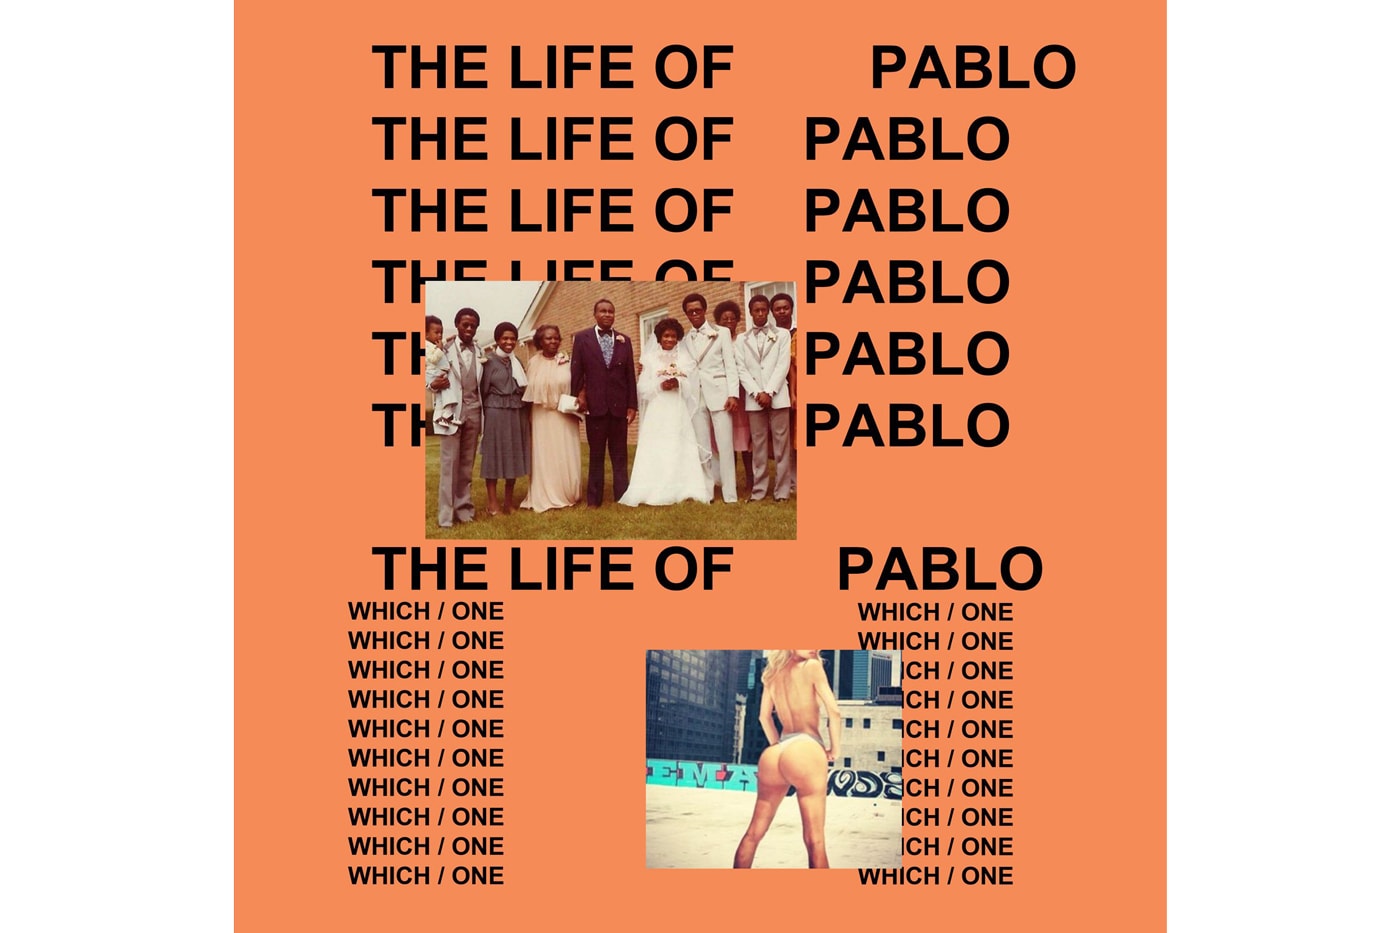 The Relationship Between Kanye West and Paul the Apostle